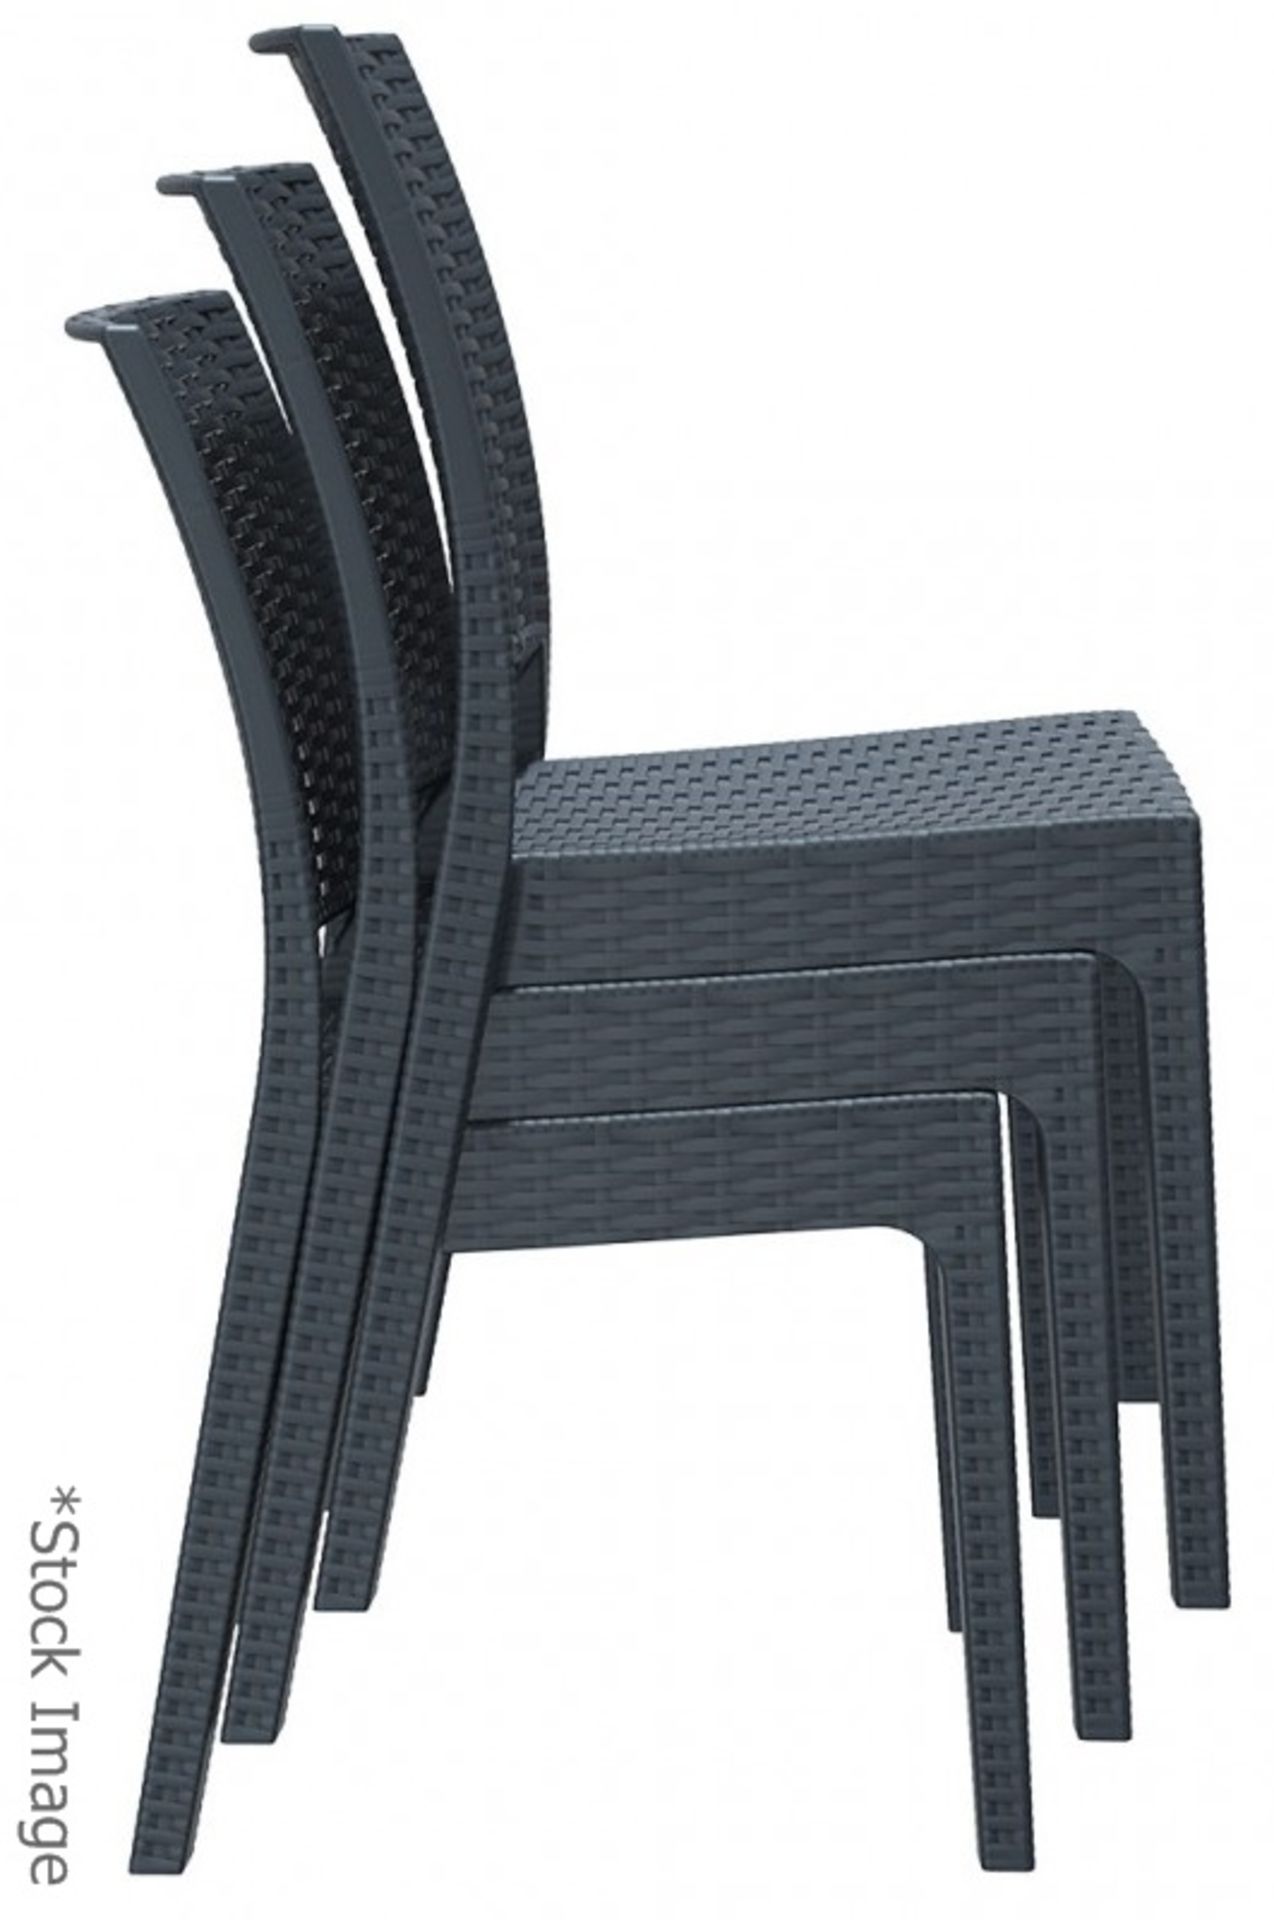 8 x SIESTA EXCLUSIVE 'Florida' Commercial Stackable Rattan-style Chairs In Dark Grey - CL987 - - Image 12 of 13